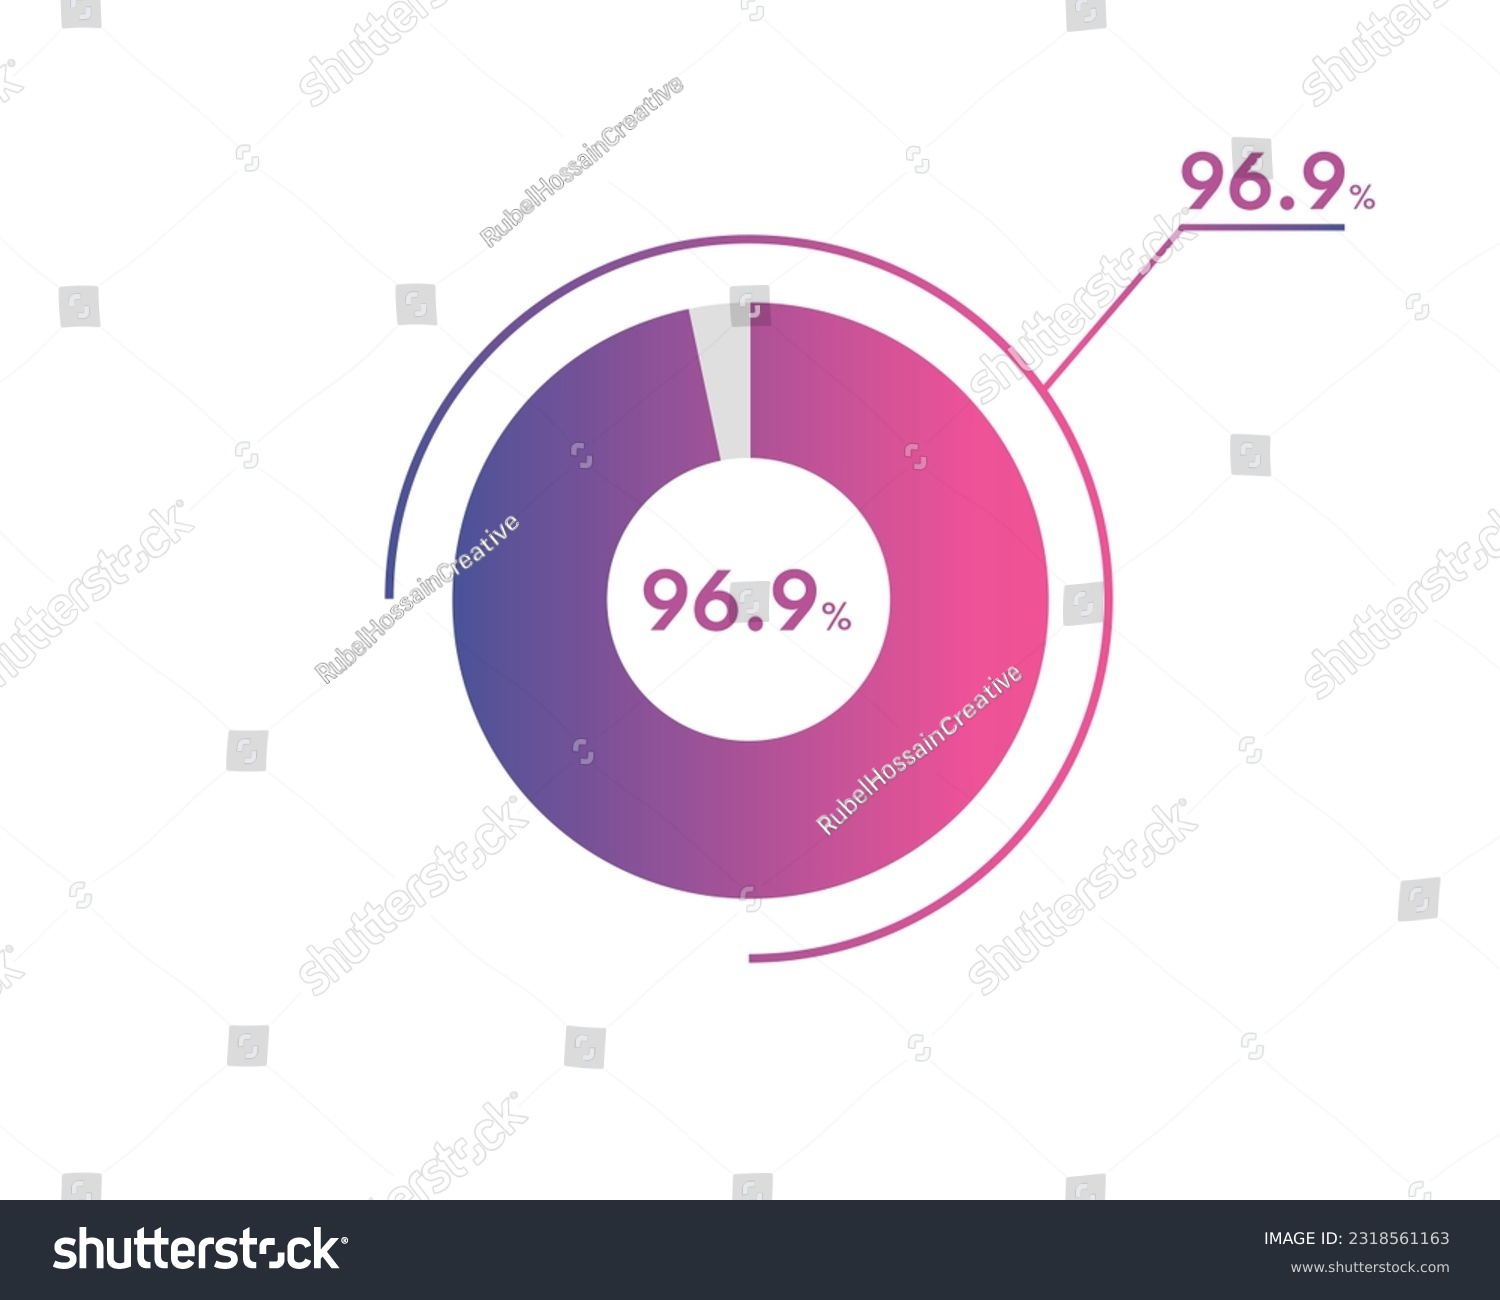 SVG of 96.9 Percentage circle diagrams Infographics vector, circle diagram business illustration, Designing the 96.9% Segment in the Pie Chart. svg